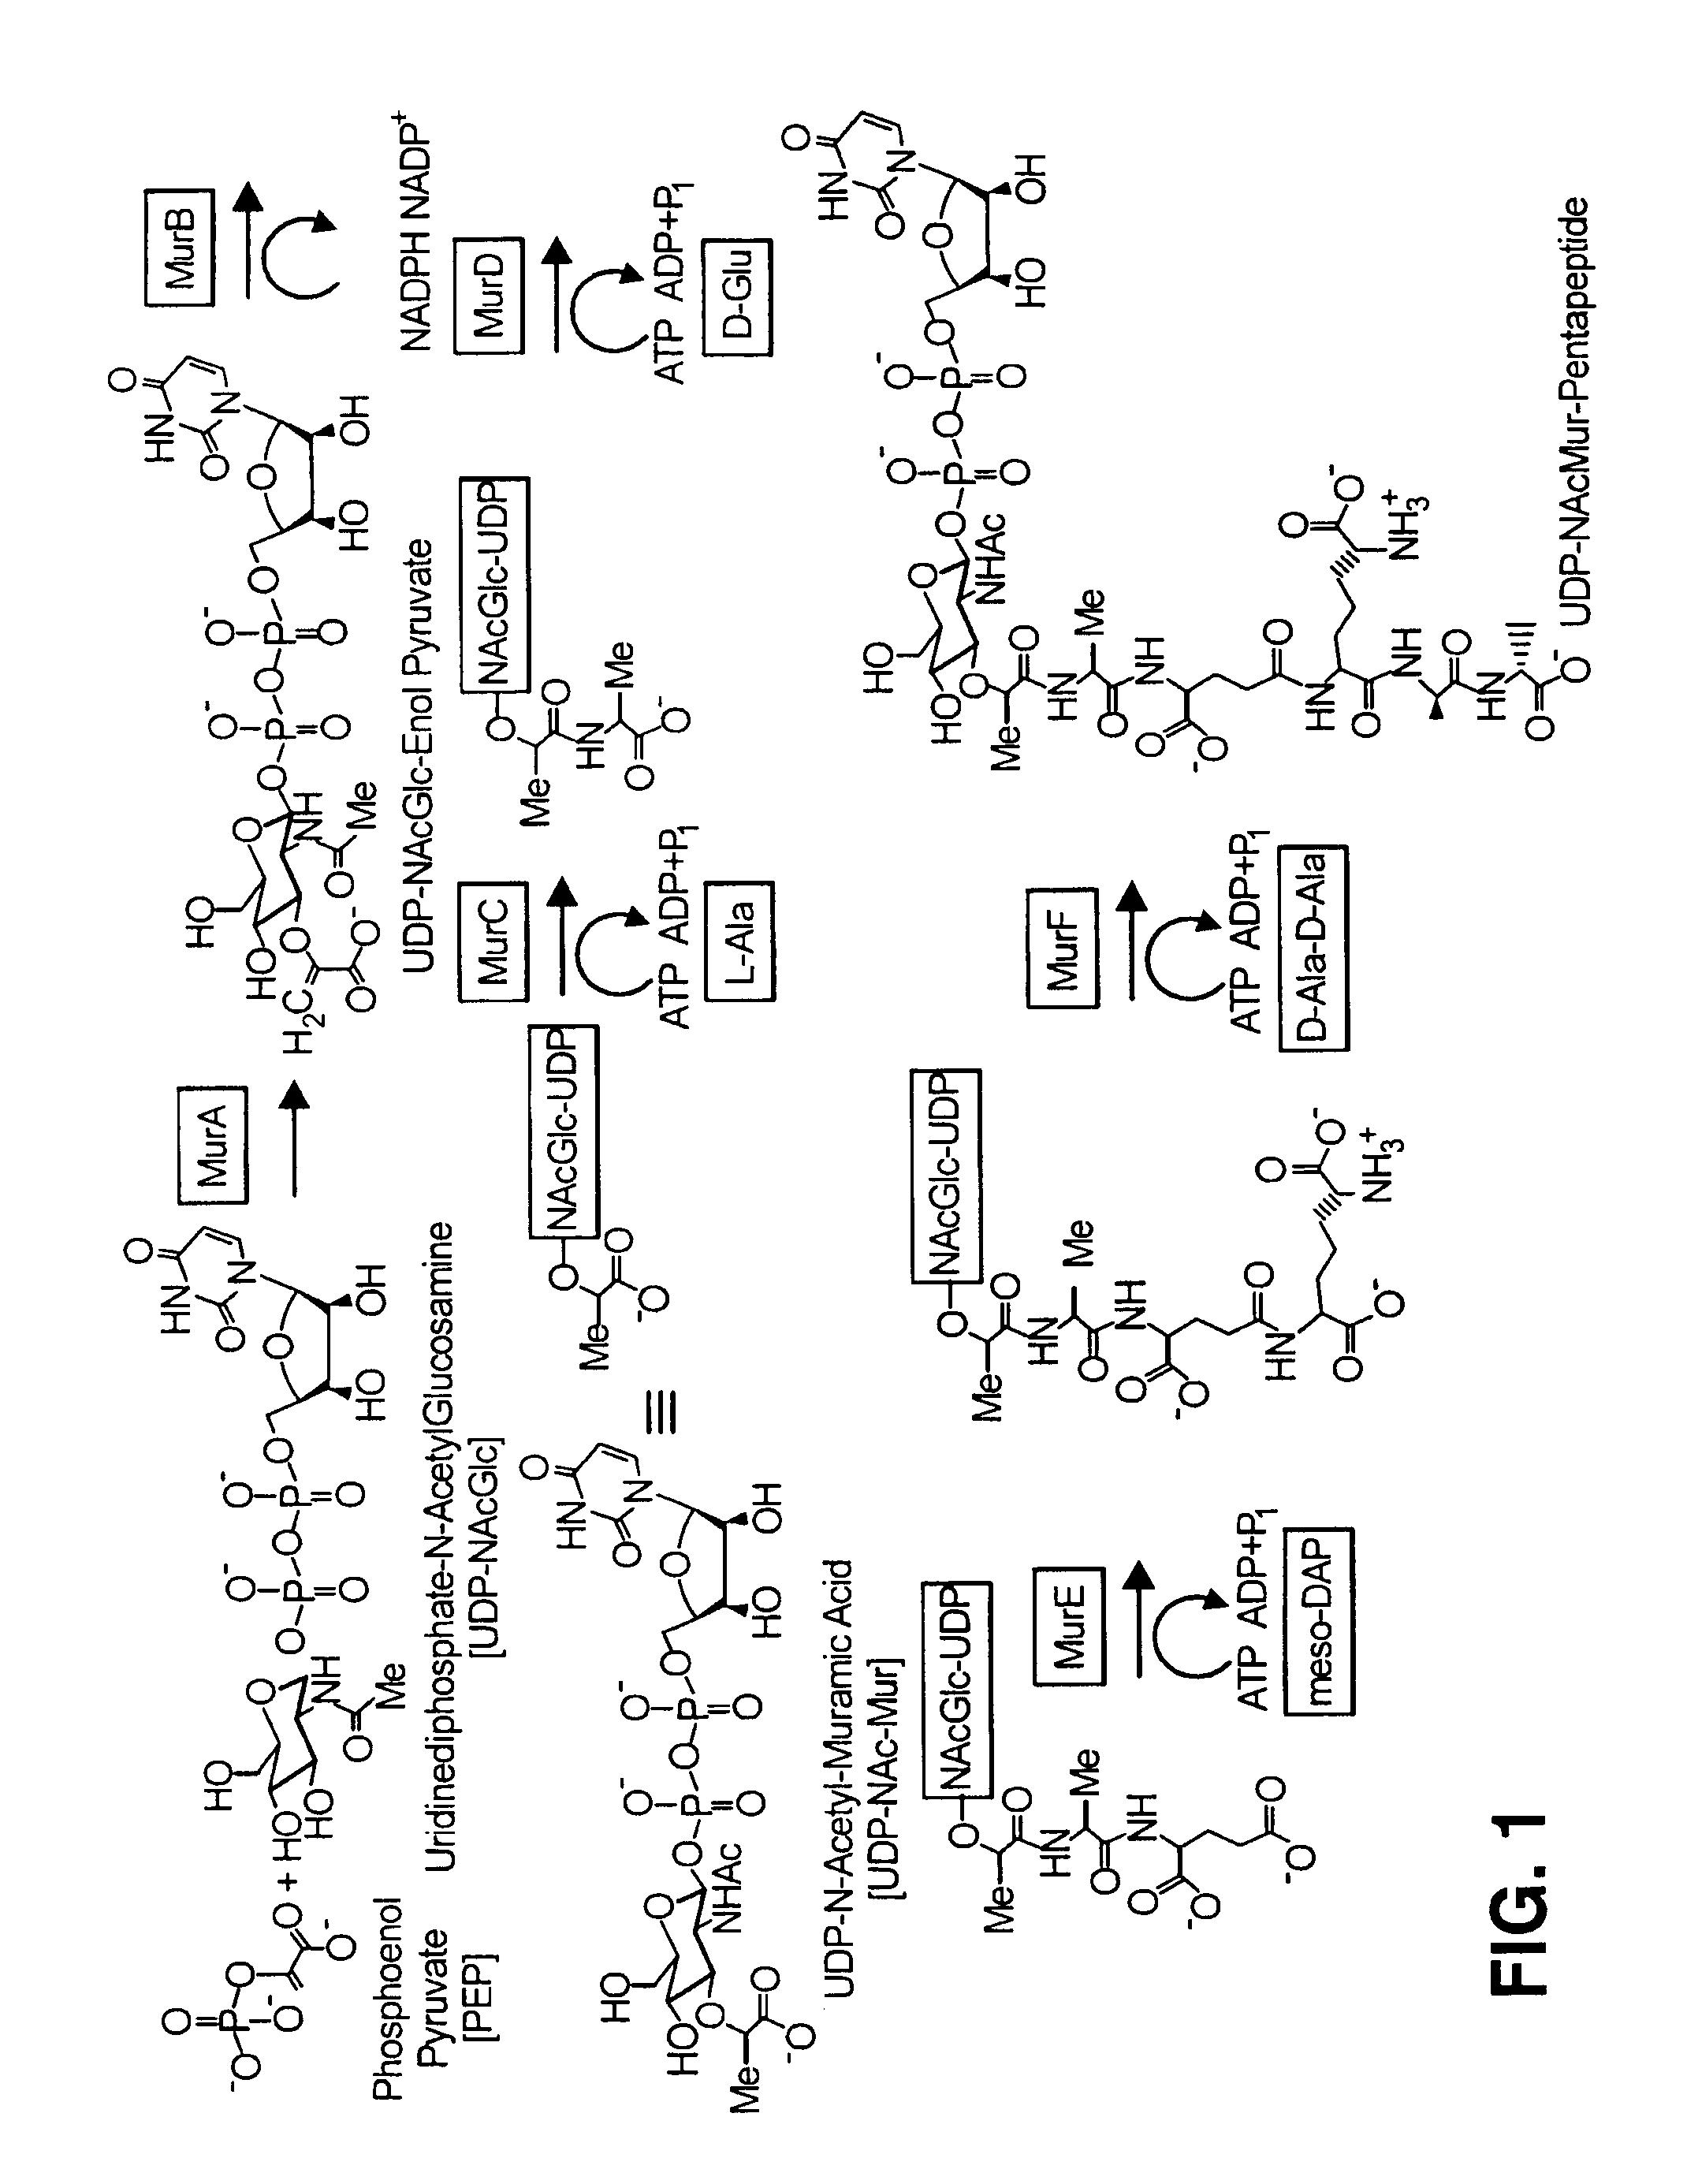 Direct adsorption scintillation assay for measuring enzyme activity and assaying biochemical processes